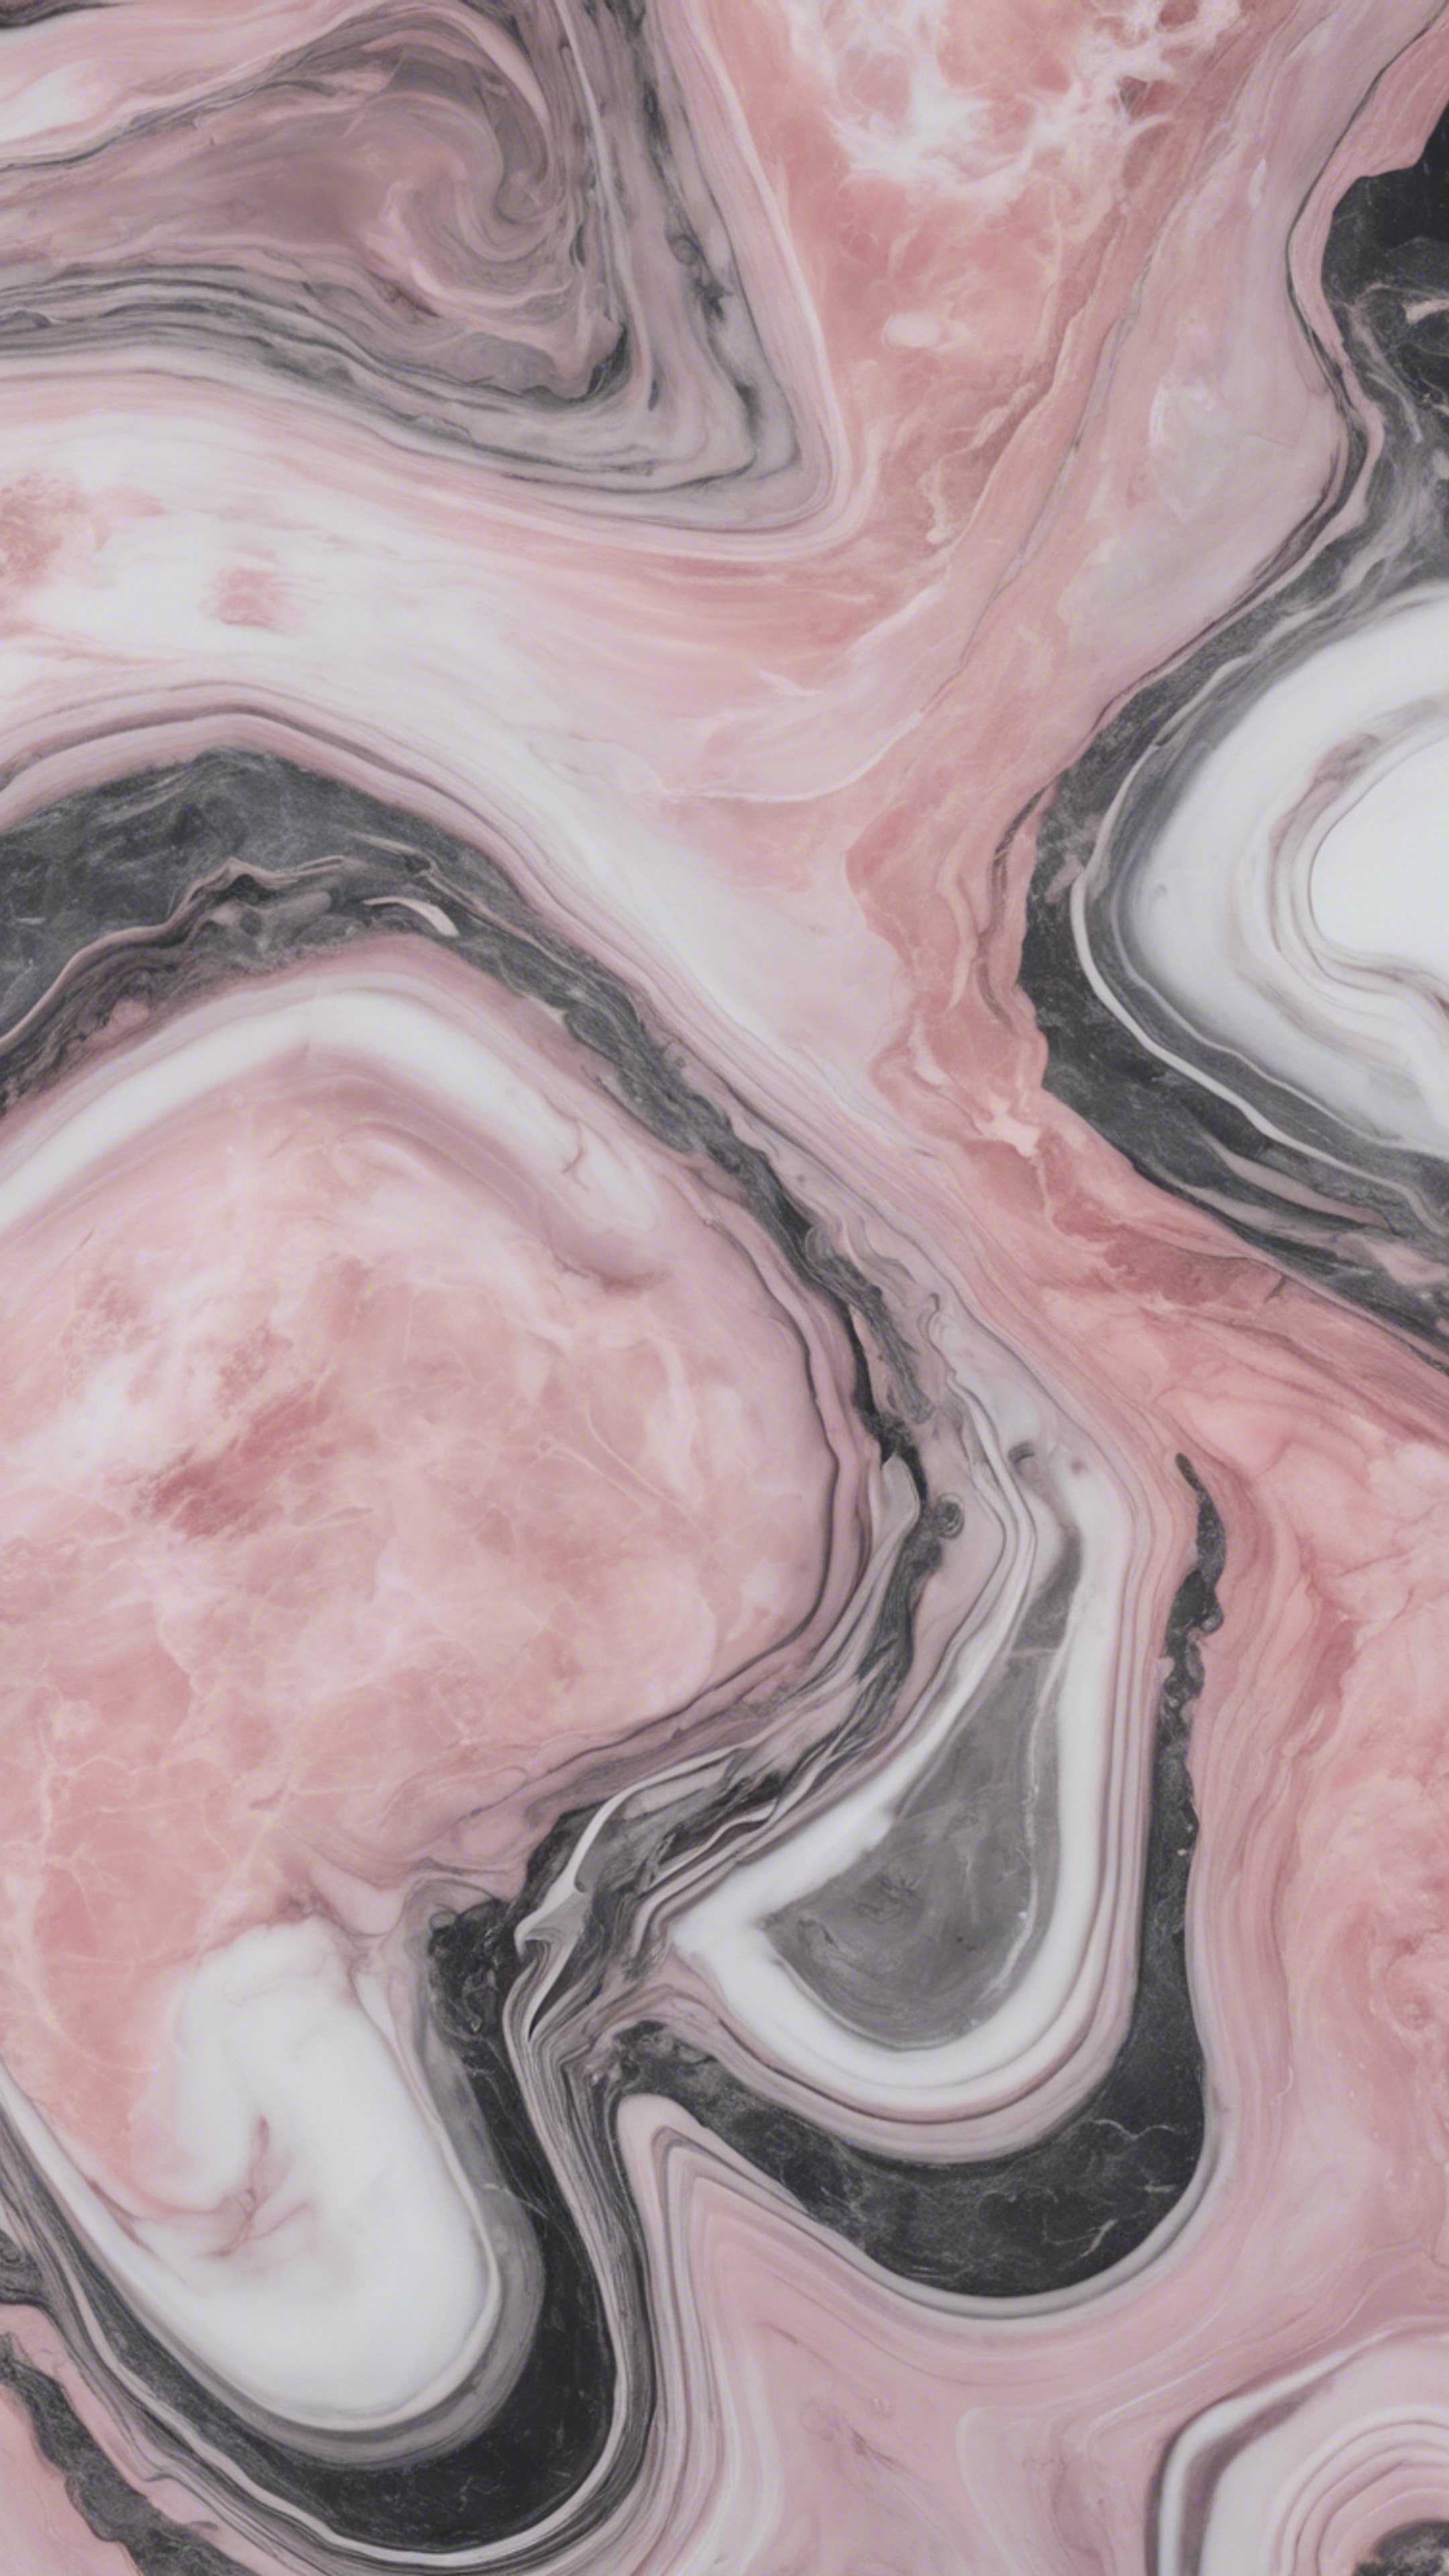 A swirling pattern of pink, white, and charcoal grey characteristic of polished pink marble. ផ្ទាំង​រូបភាព[fb90daec103040ffbaff]